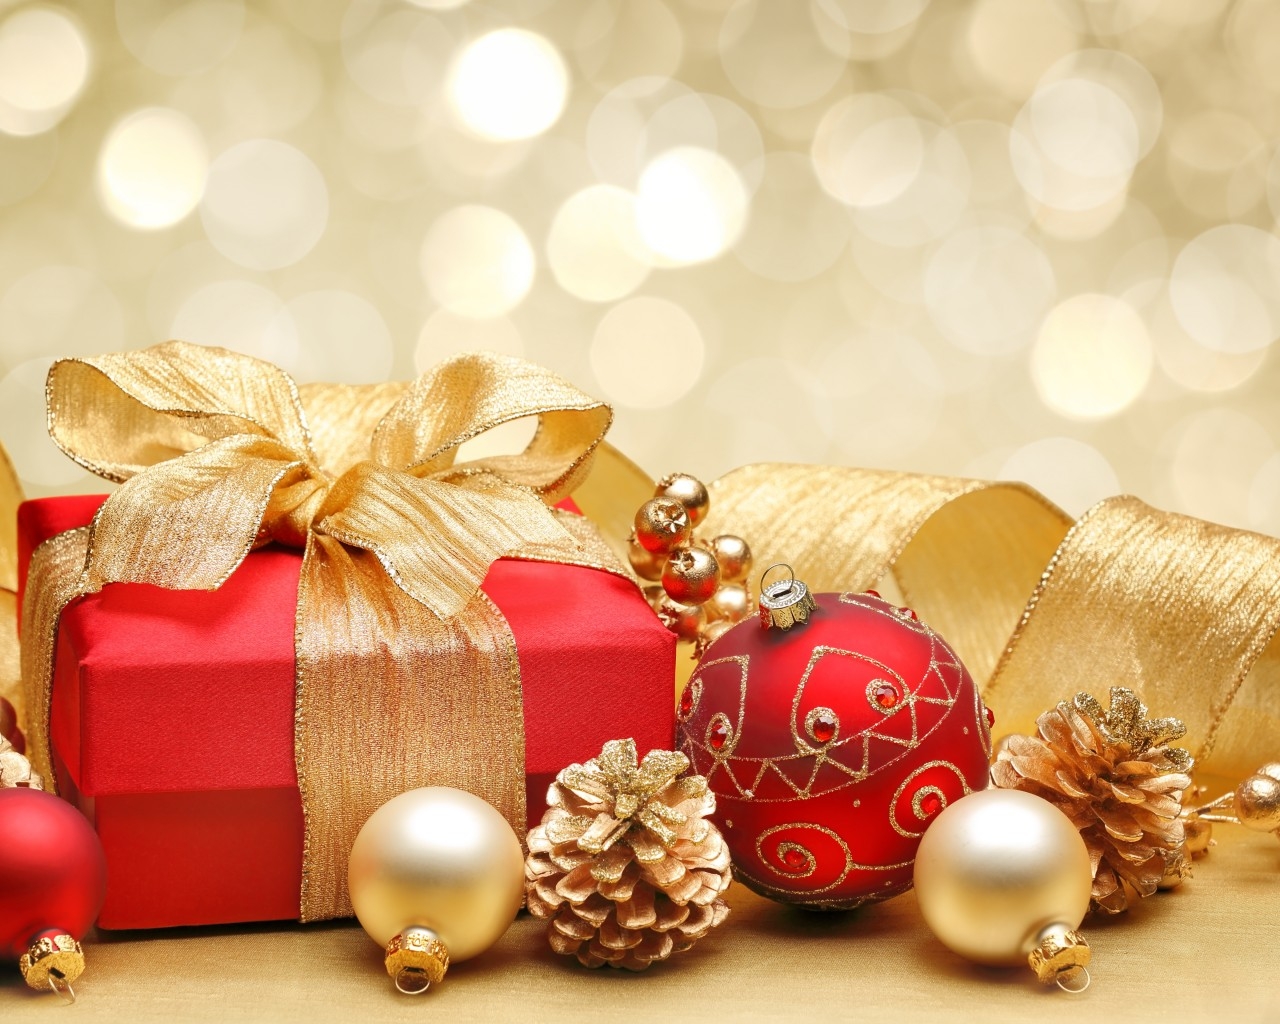 Christmas Gift Box and Decorations for 1280 x 1024 resolution